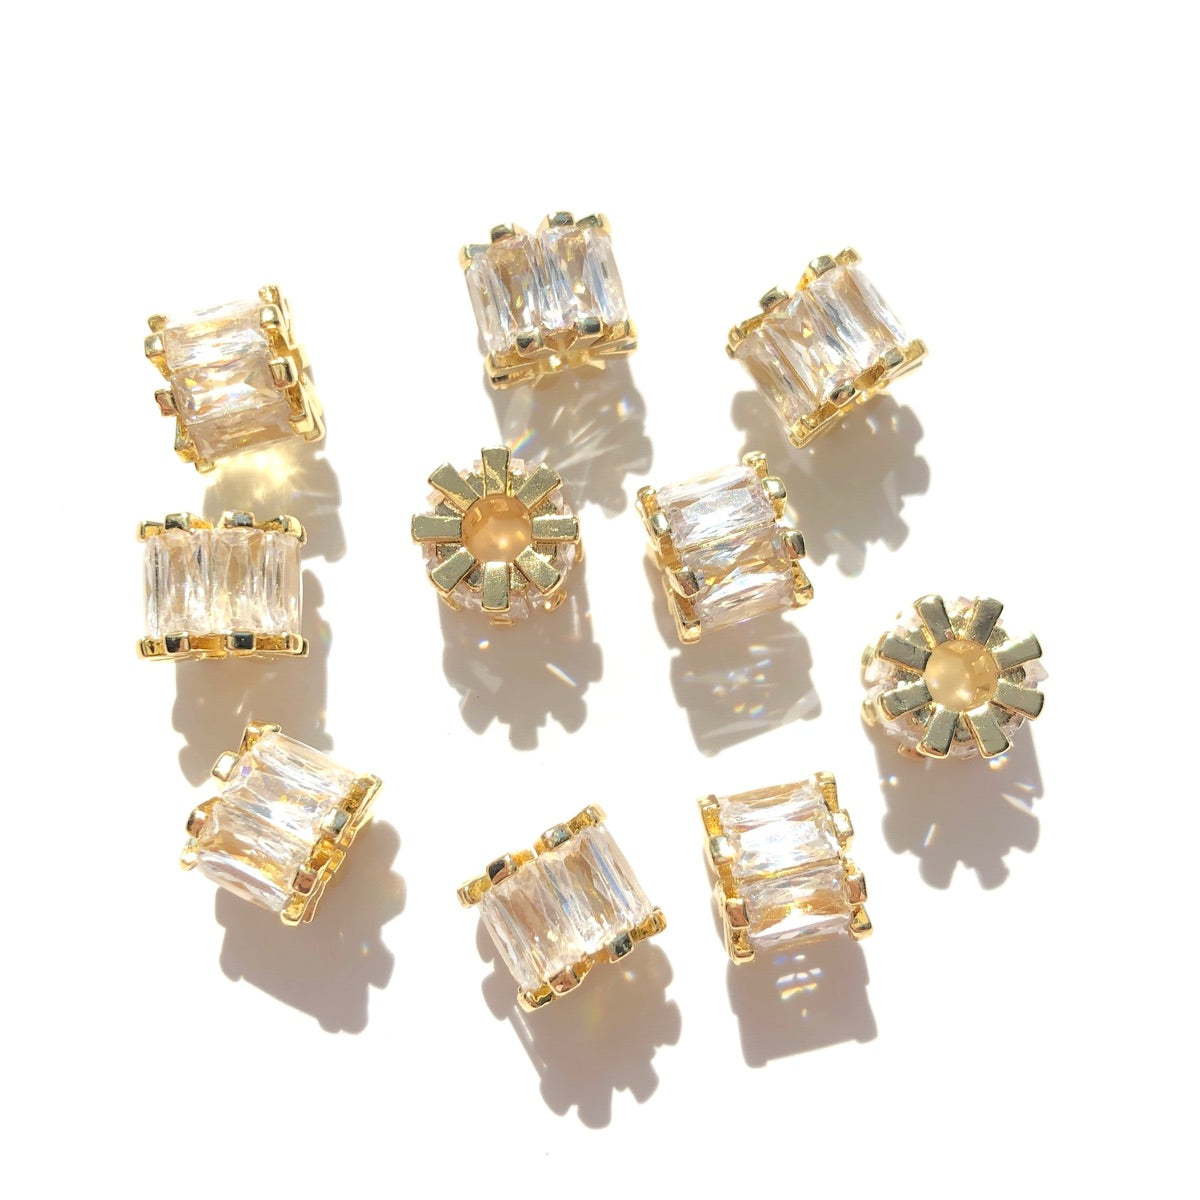 10-20-50pcs/lot Rectangle CZ Paved Rondelle Wheel Spacers Gold CZ Paved Spacers Big Hole Beads New Spacers Arrivals Rondelle Beads Wholesale Charms Beads Beyond